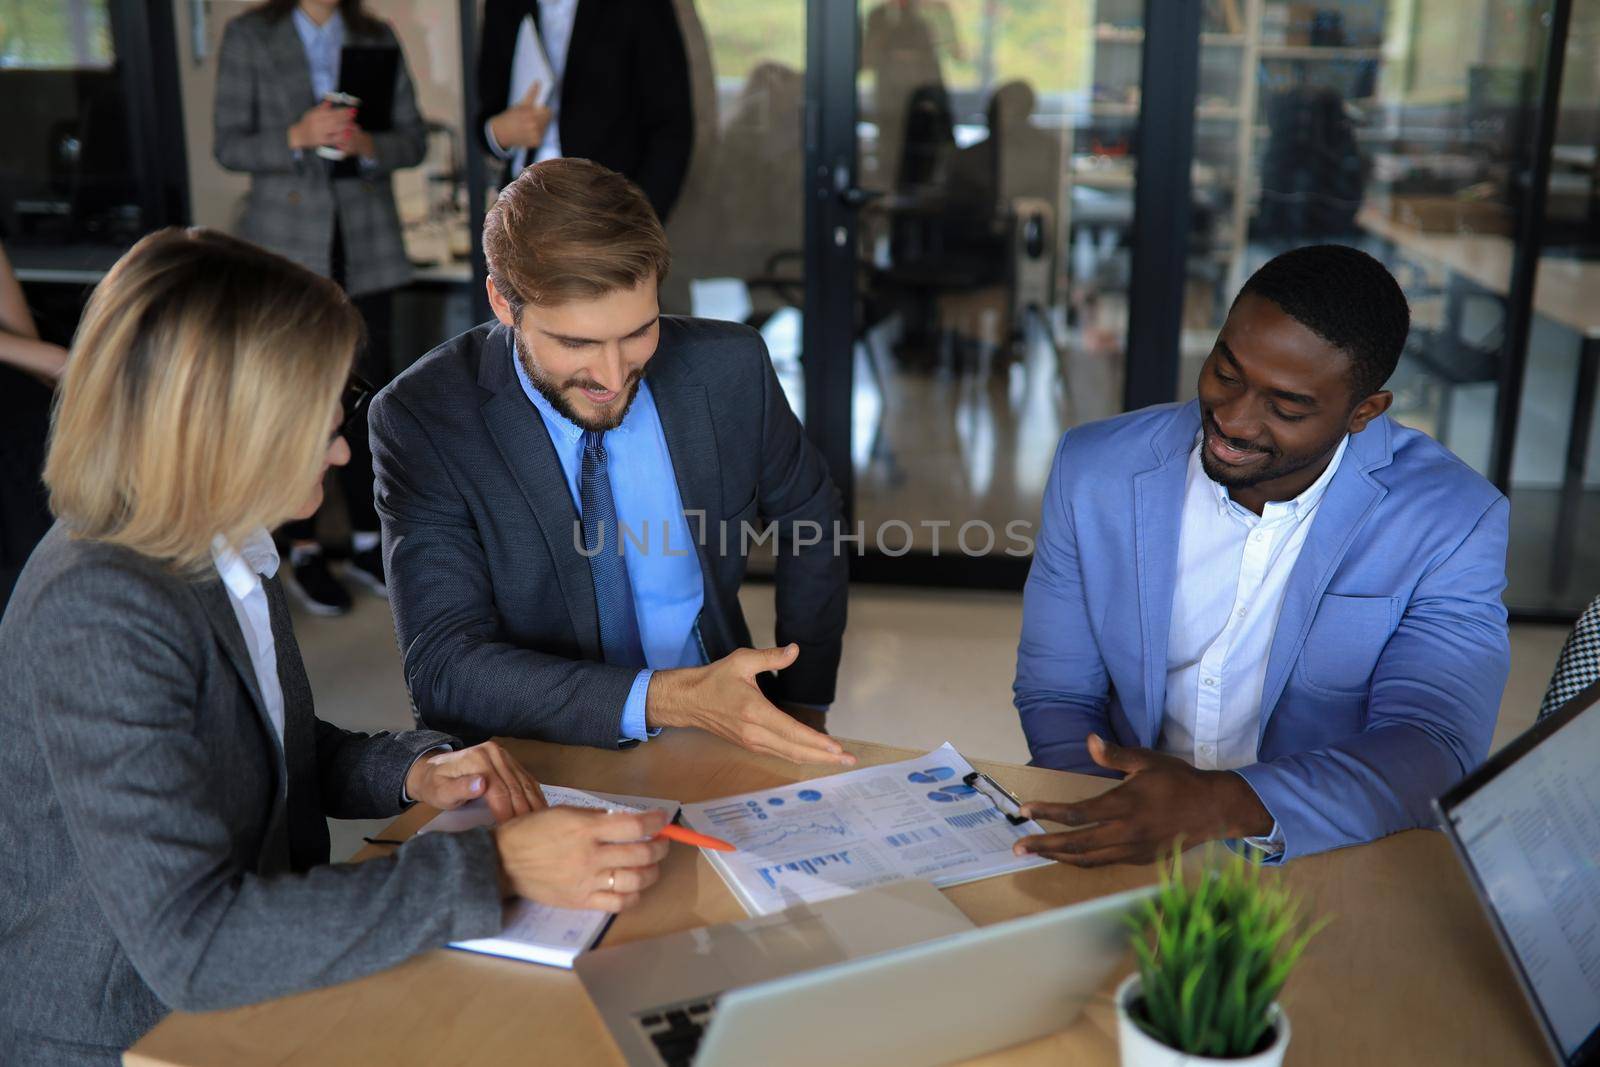 Group of business people in a meeting discussing and planning a project